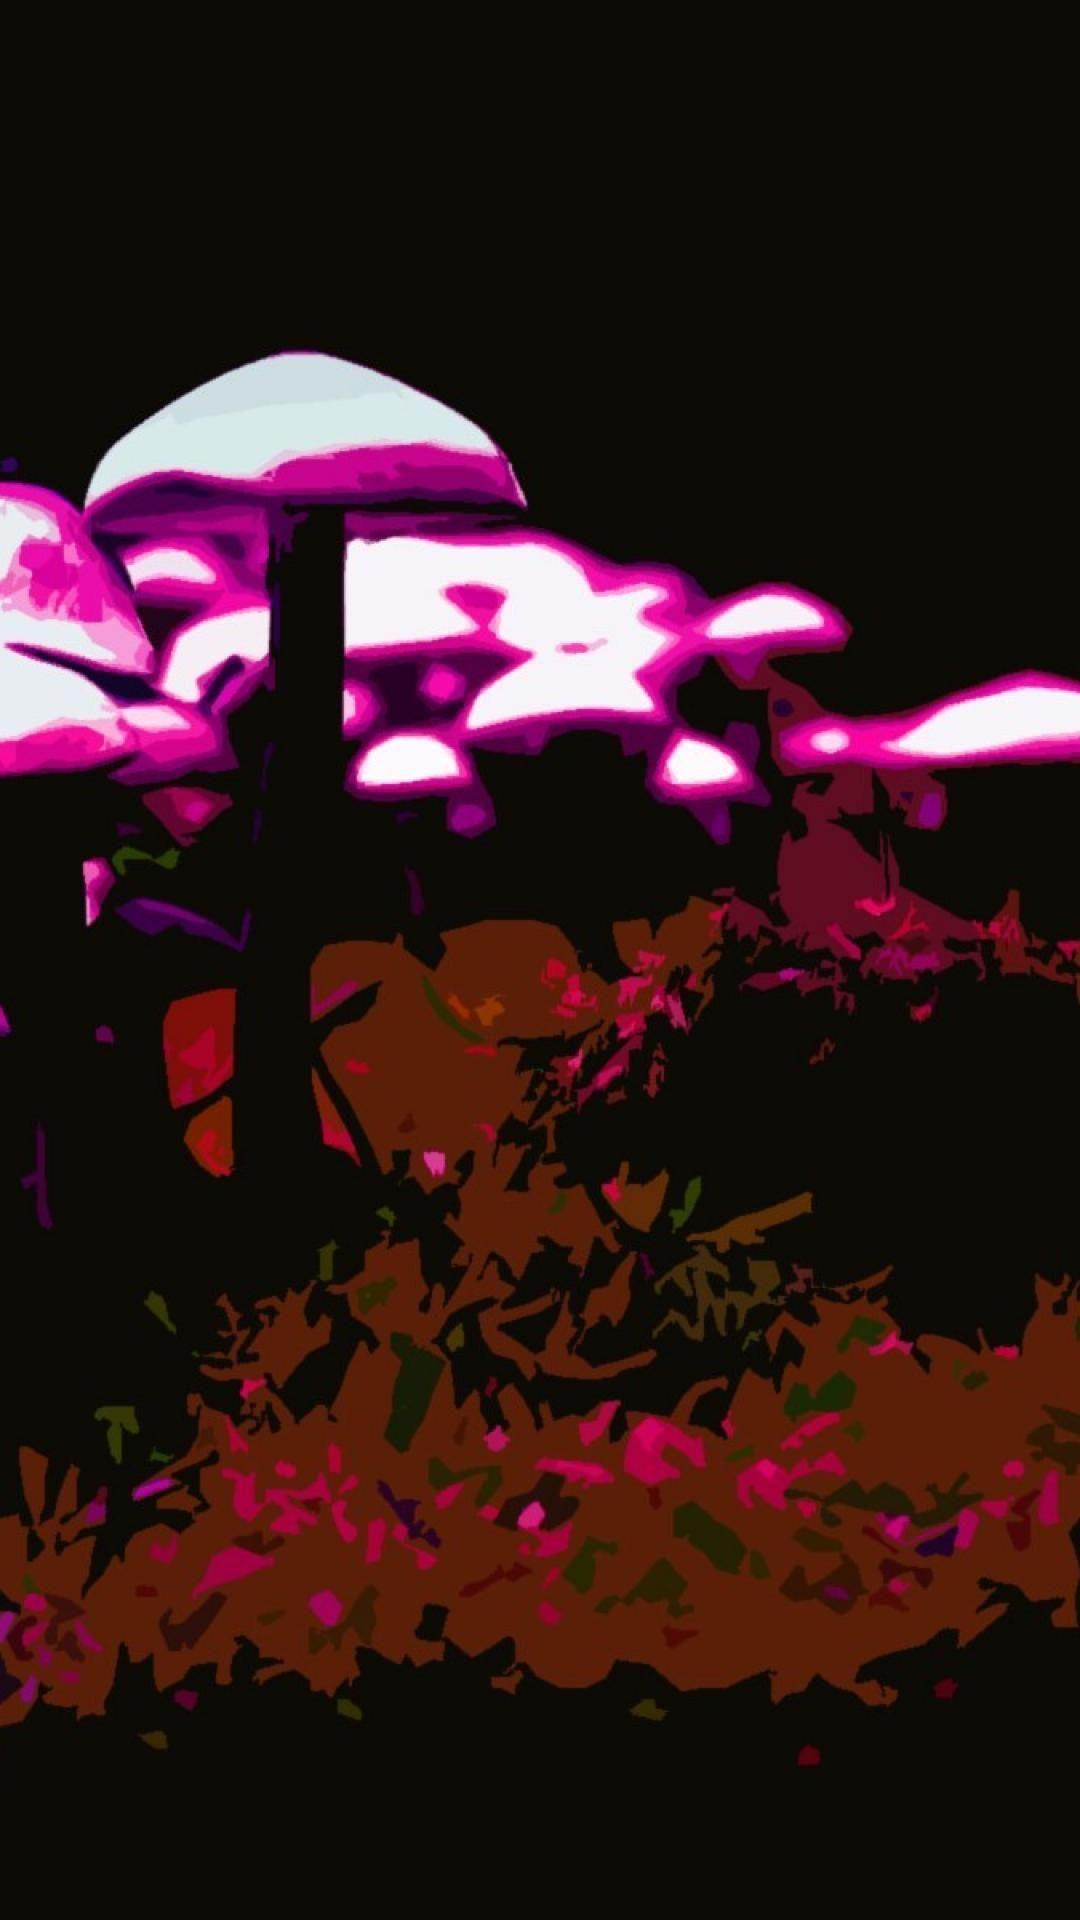 Mushrooms psychedelic trippy shrooms wallpaper